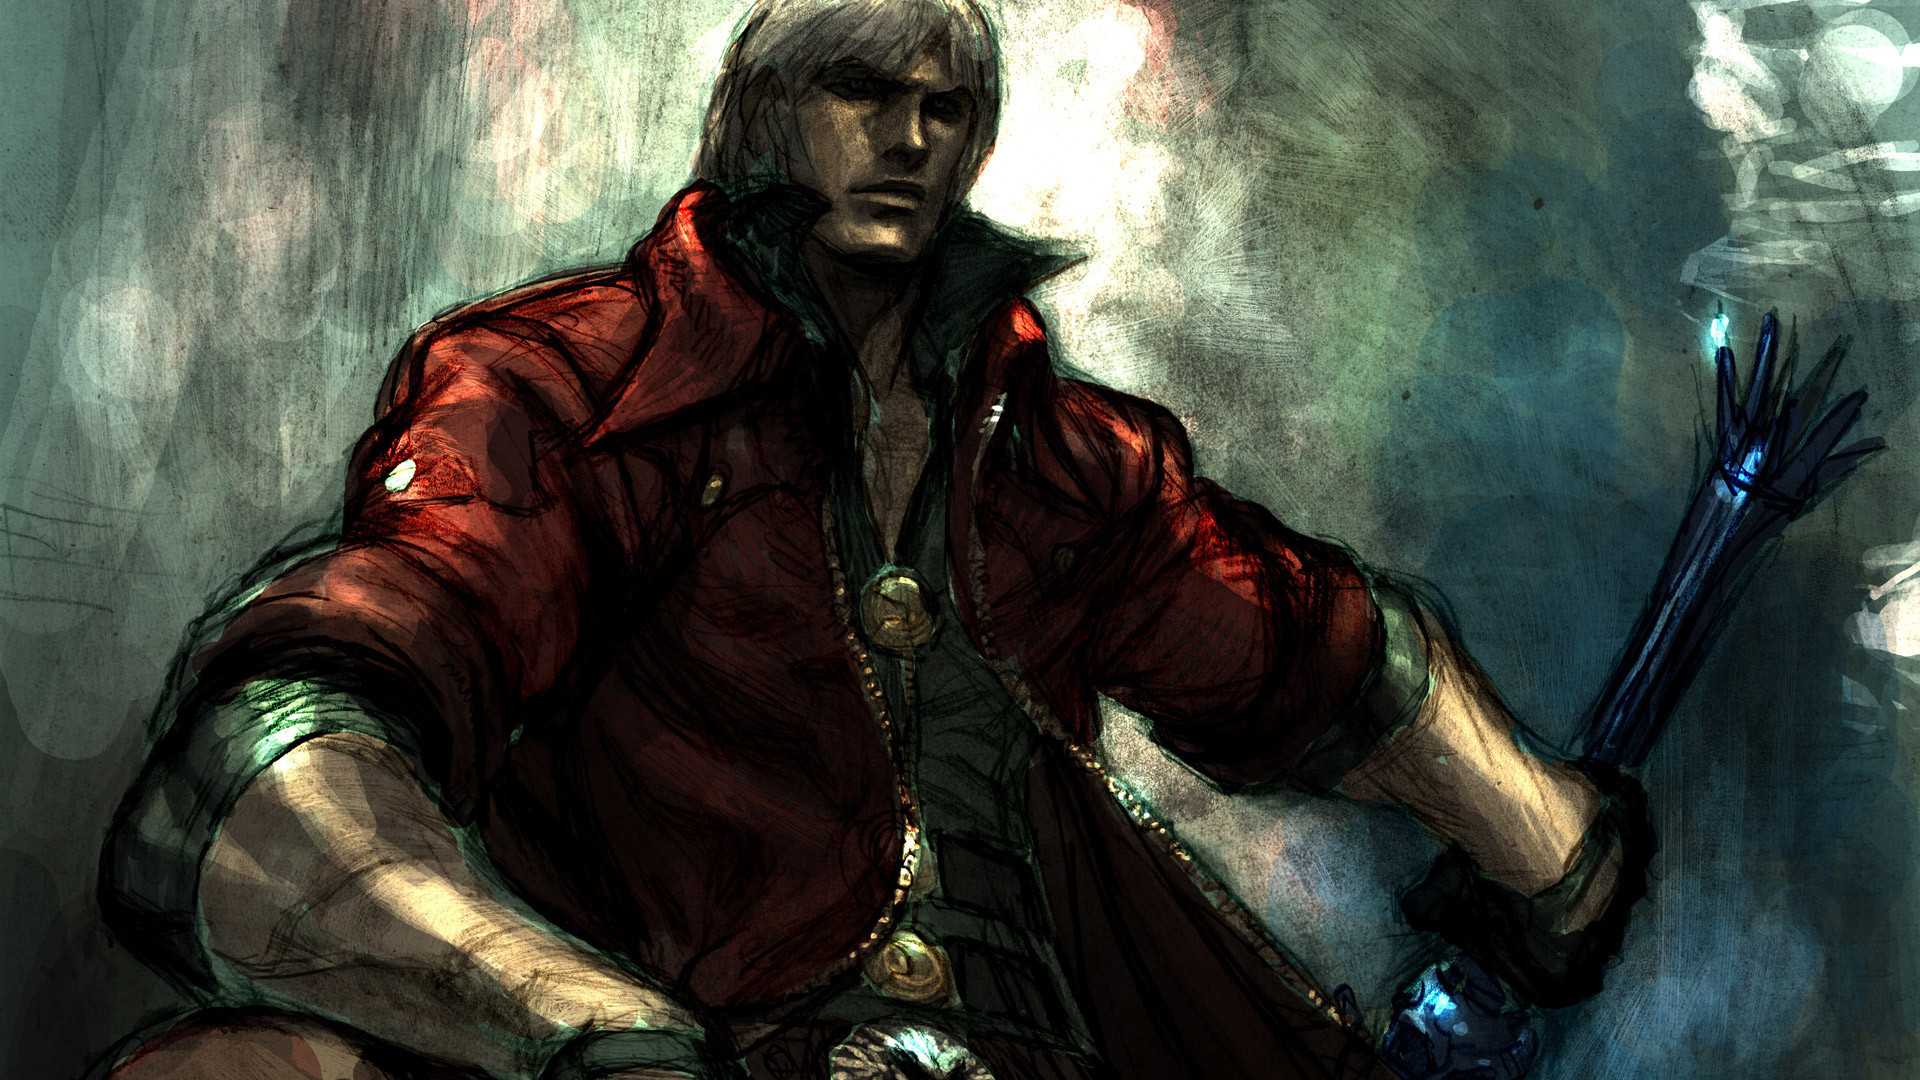 free download devil may cry